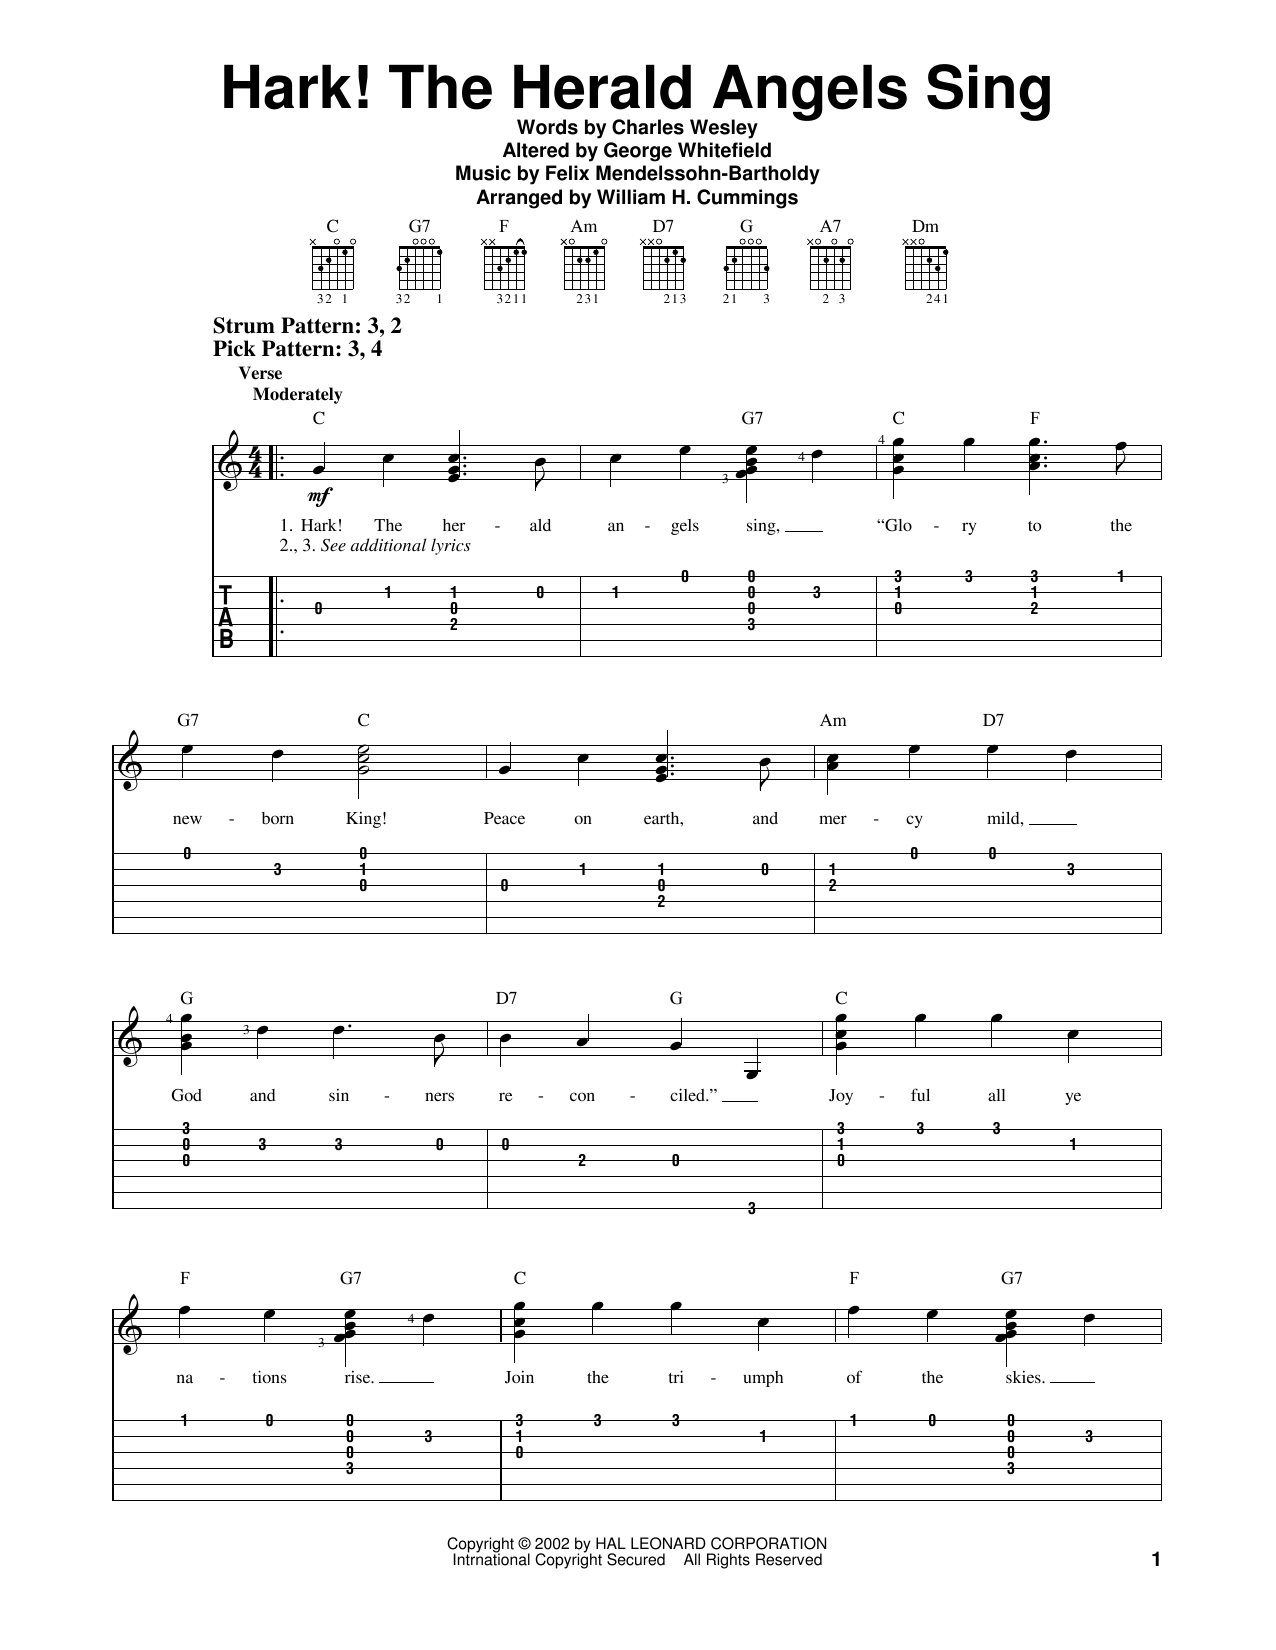 Charles Wesley Hark! The Herald Angels Sing sheet music notes and chords. Download Printable PDF.